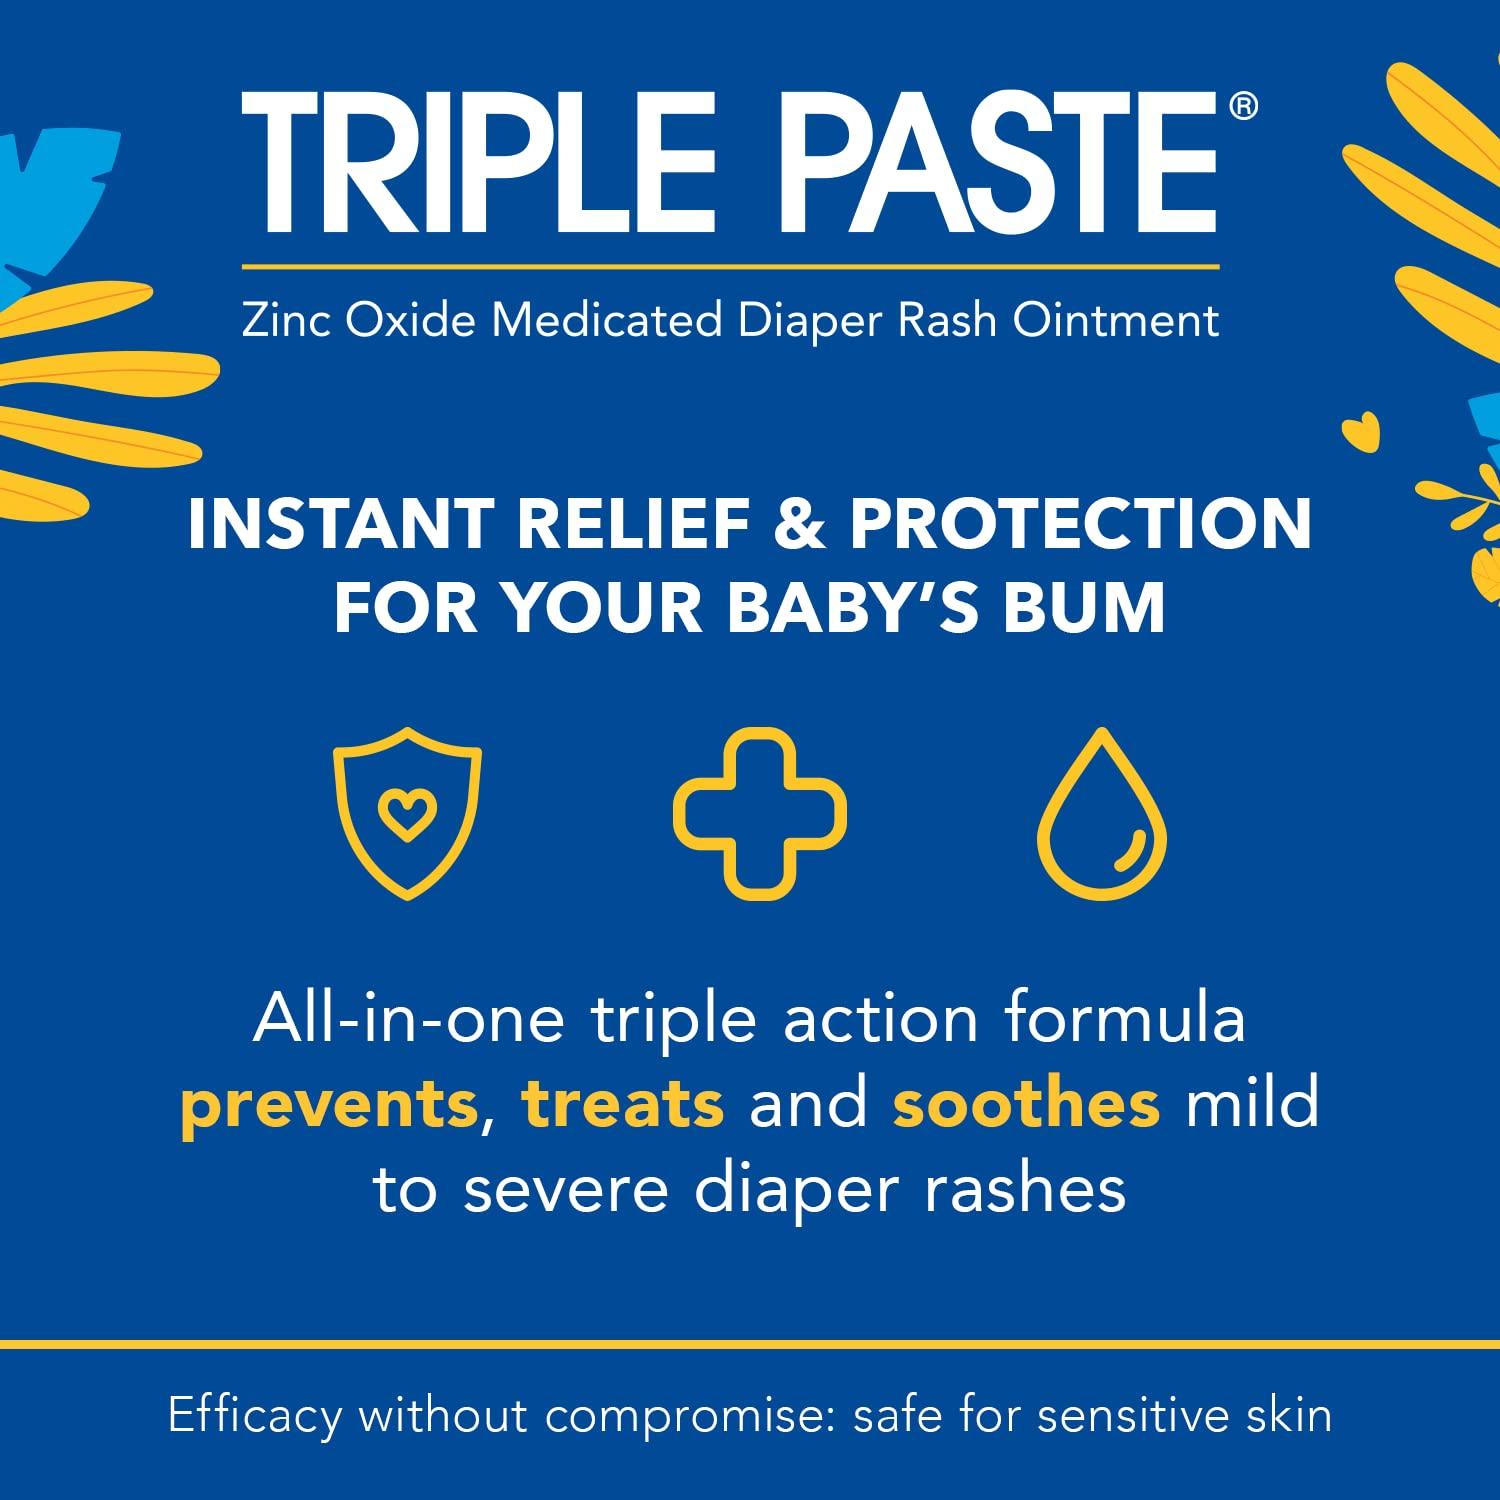 Triple Paste Diaper Rash Cream for Baby - 2 oz Tube - Zinc Oxide Ointment Treats, Soothes and Prevents Diaper Rash - Pediatrician-Recommended